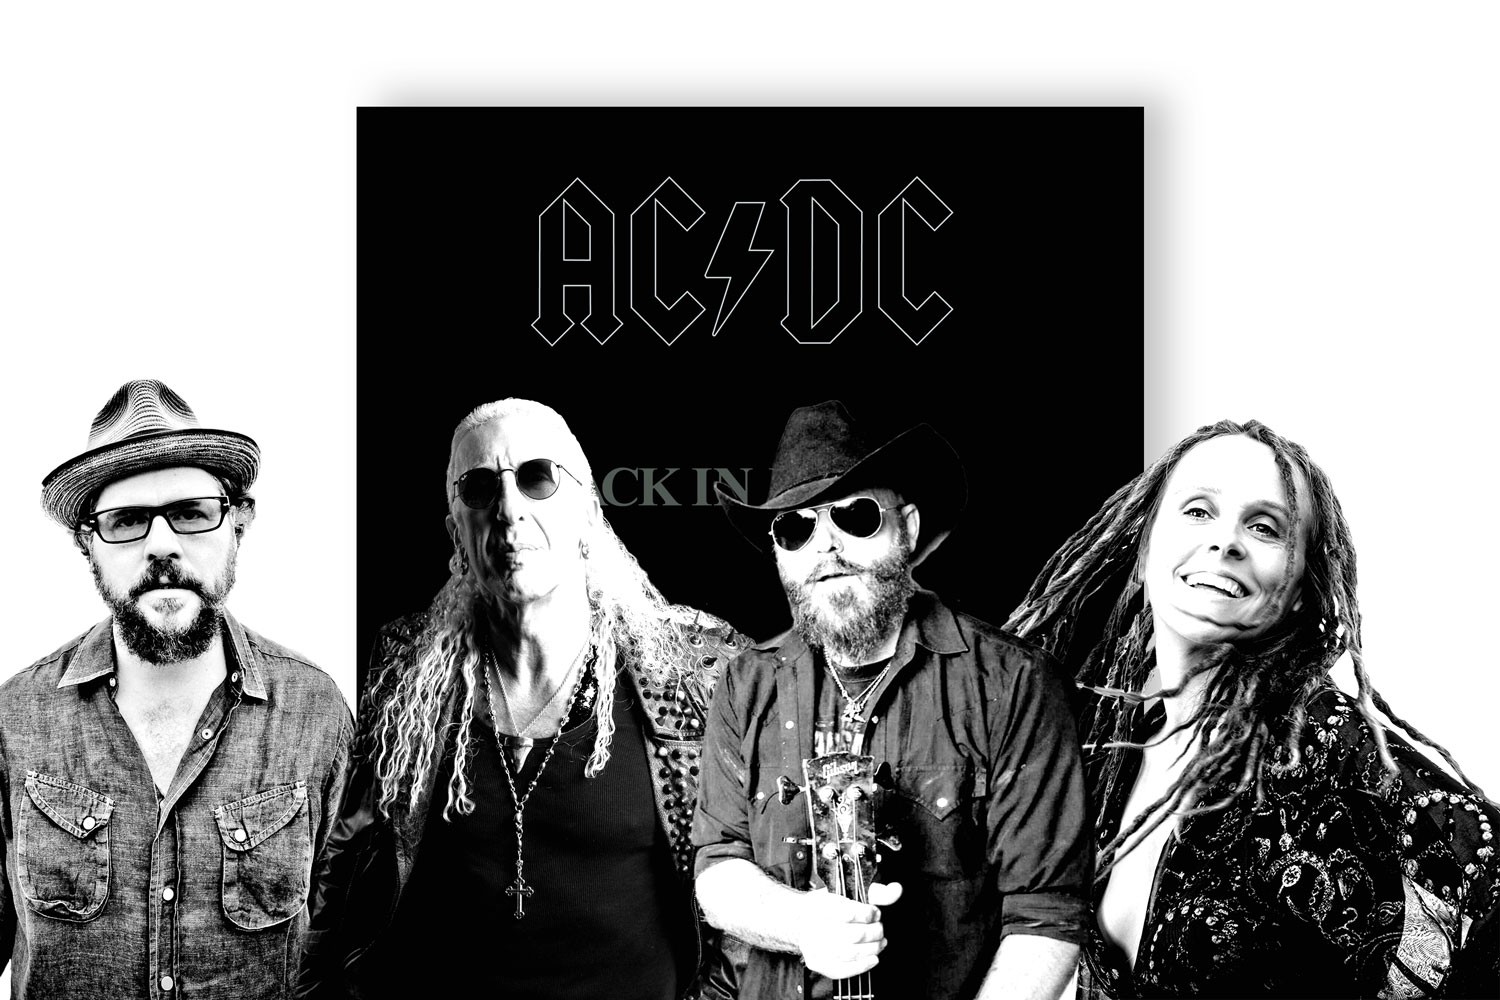 As AC/DC's Back in Black turns 40, the Drive-By Truckers' Patterson Hood, Twisted Sister's Dee Snider and more reflect on the album's legacy